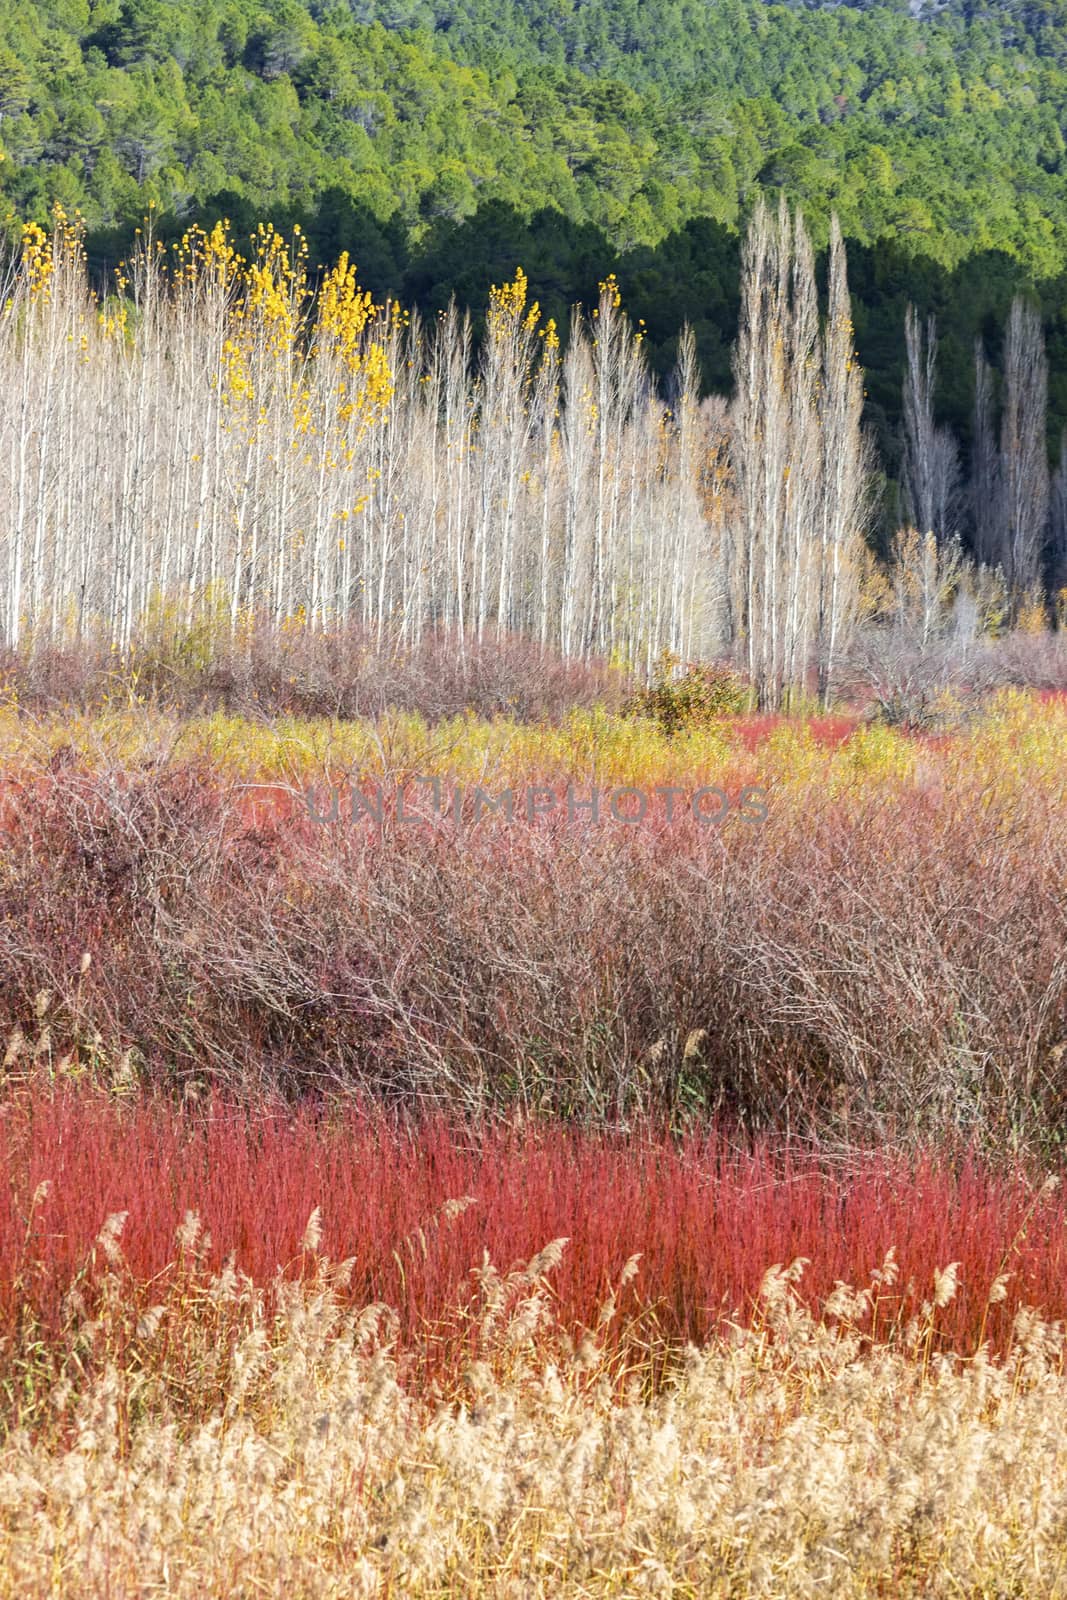 Autumn colorful landscape of a field of poplars and red wicker